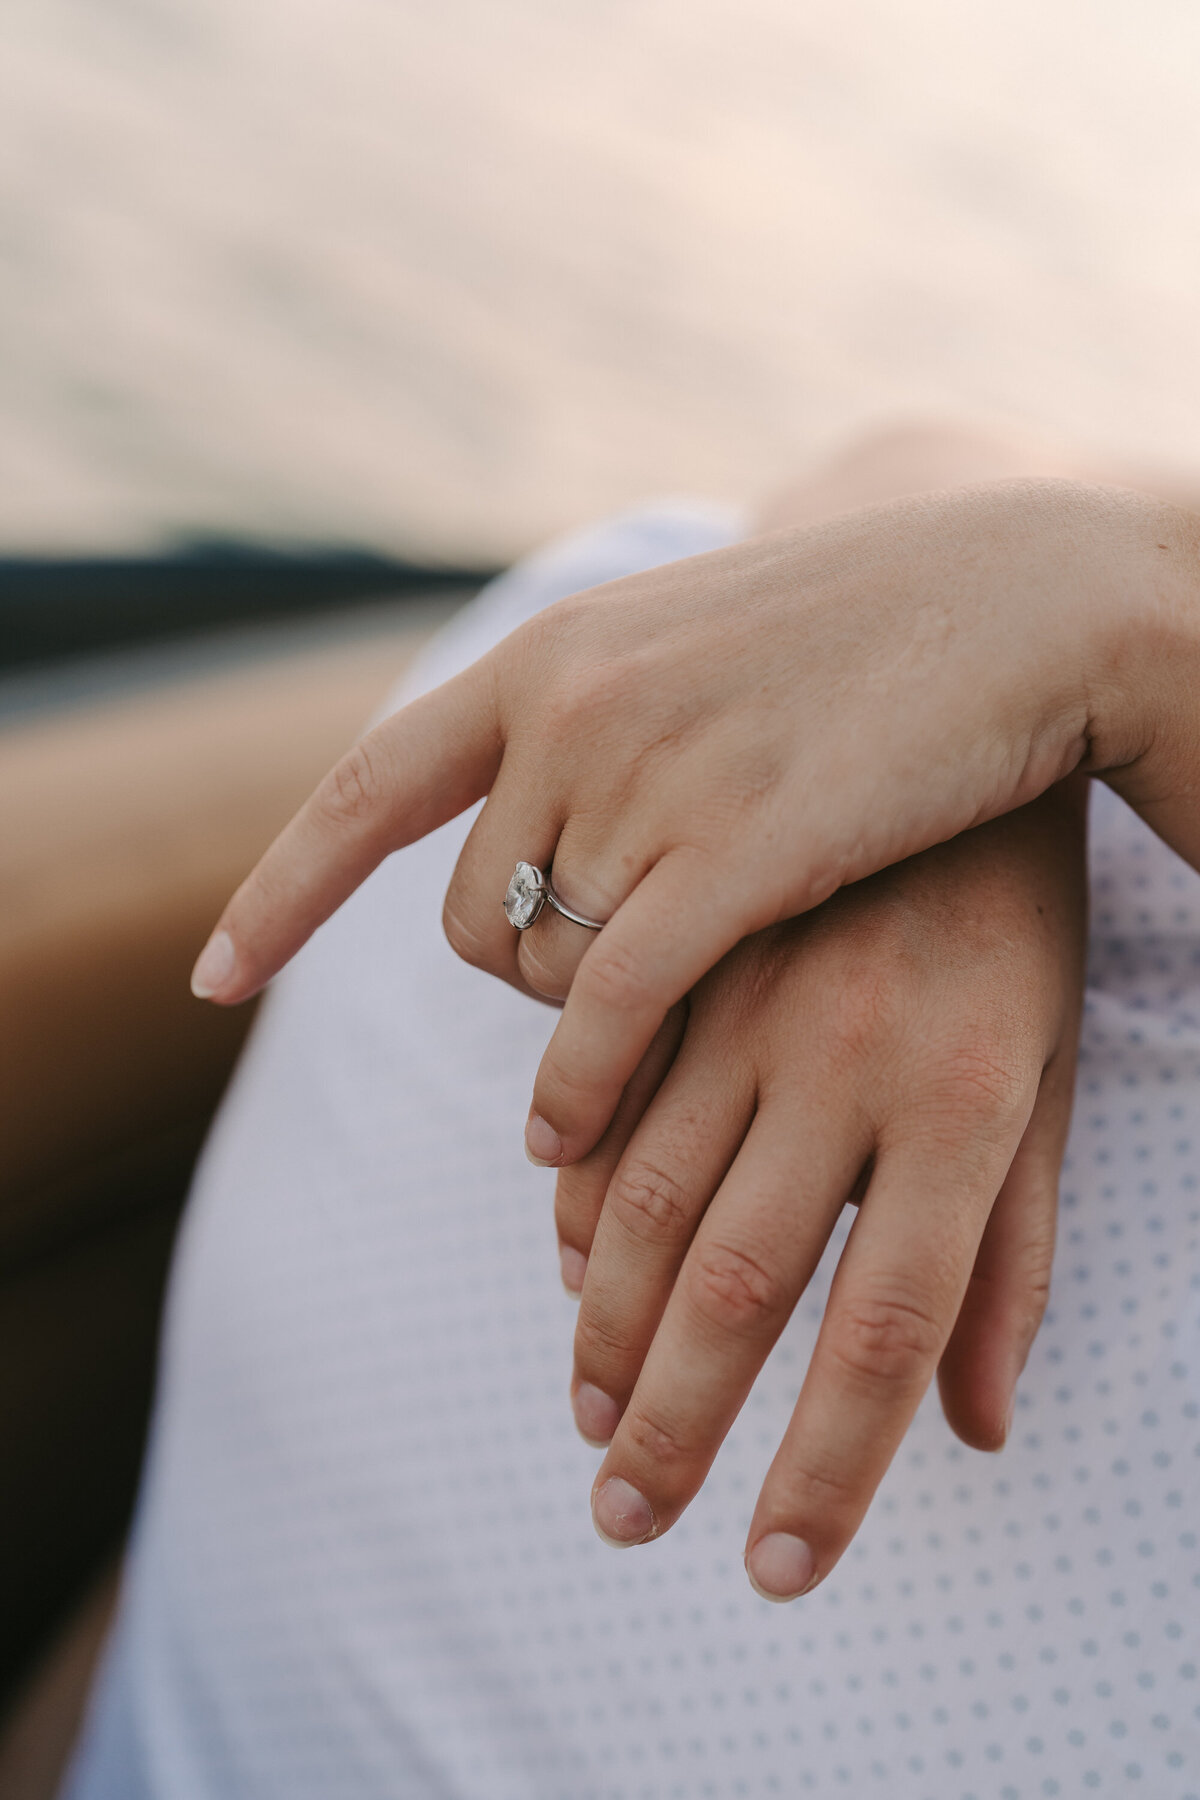 A photograph in color of Jessica and Jeff during their engagement session on a boat on Lake Travis in Austin, Texas. The photograph shows a close-up of Jessica’s hands around Jeff’s neck. Her hands are relaxed, crossed at the wrists, and her engagement ring is sparkling. Wedding and engagement photography by Stacie McChesney/Vitae Weddings.